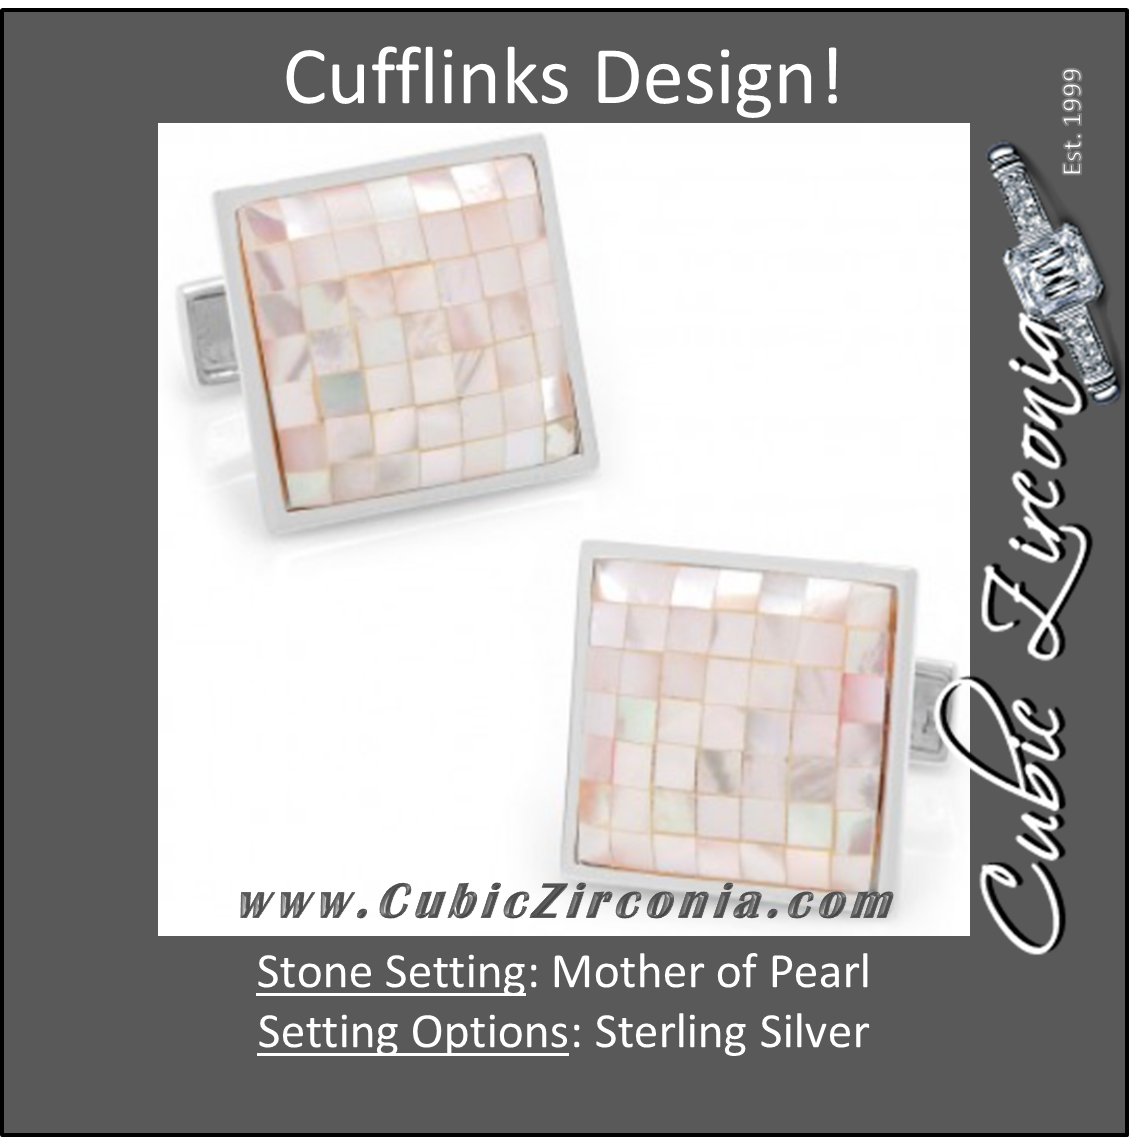 Men’s Cufflinks- Sterling Silver Mosaic Style with Pink Mother of Pearl Inlay